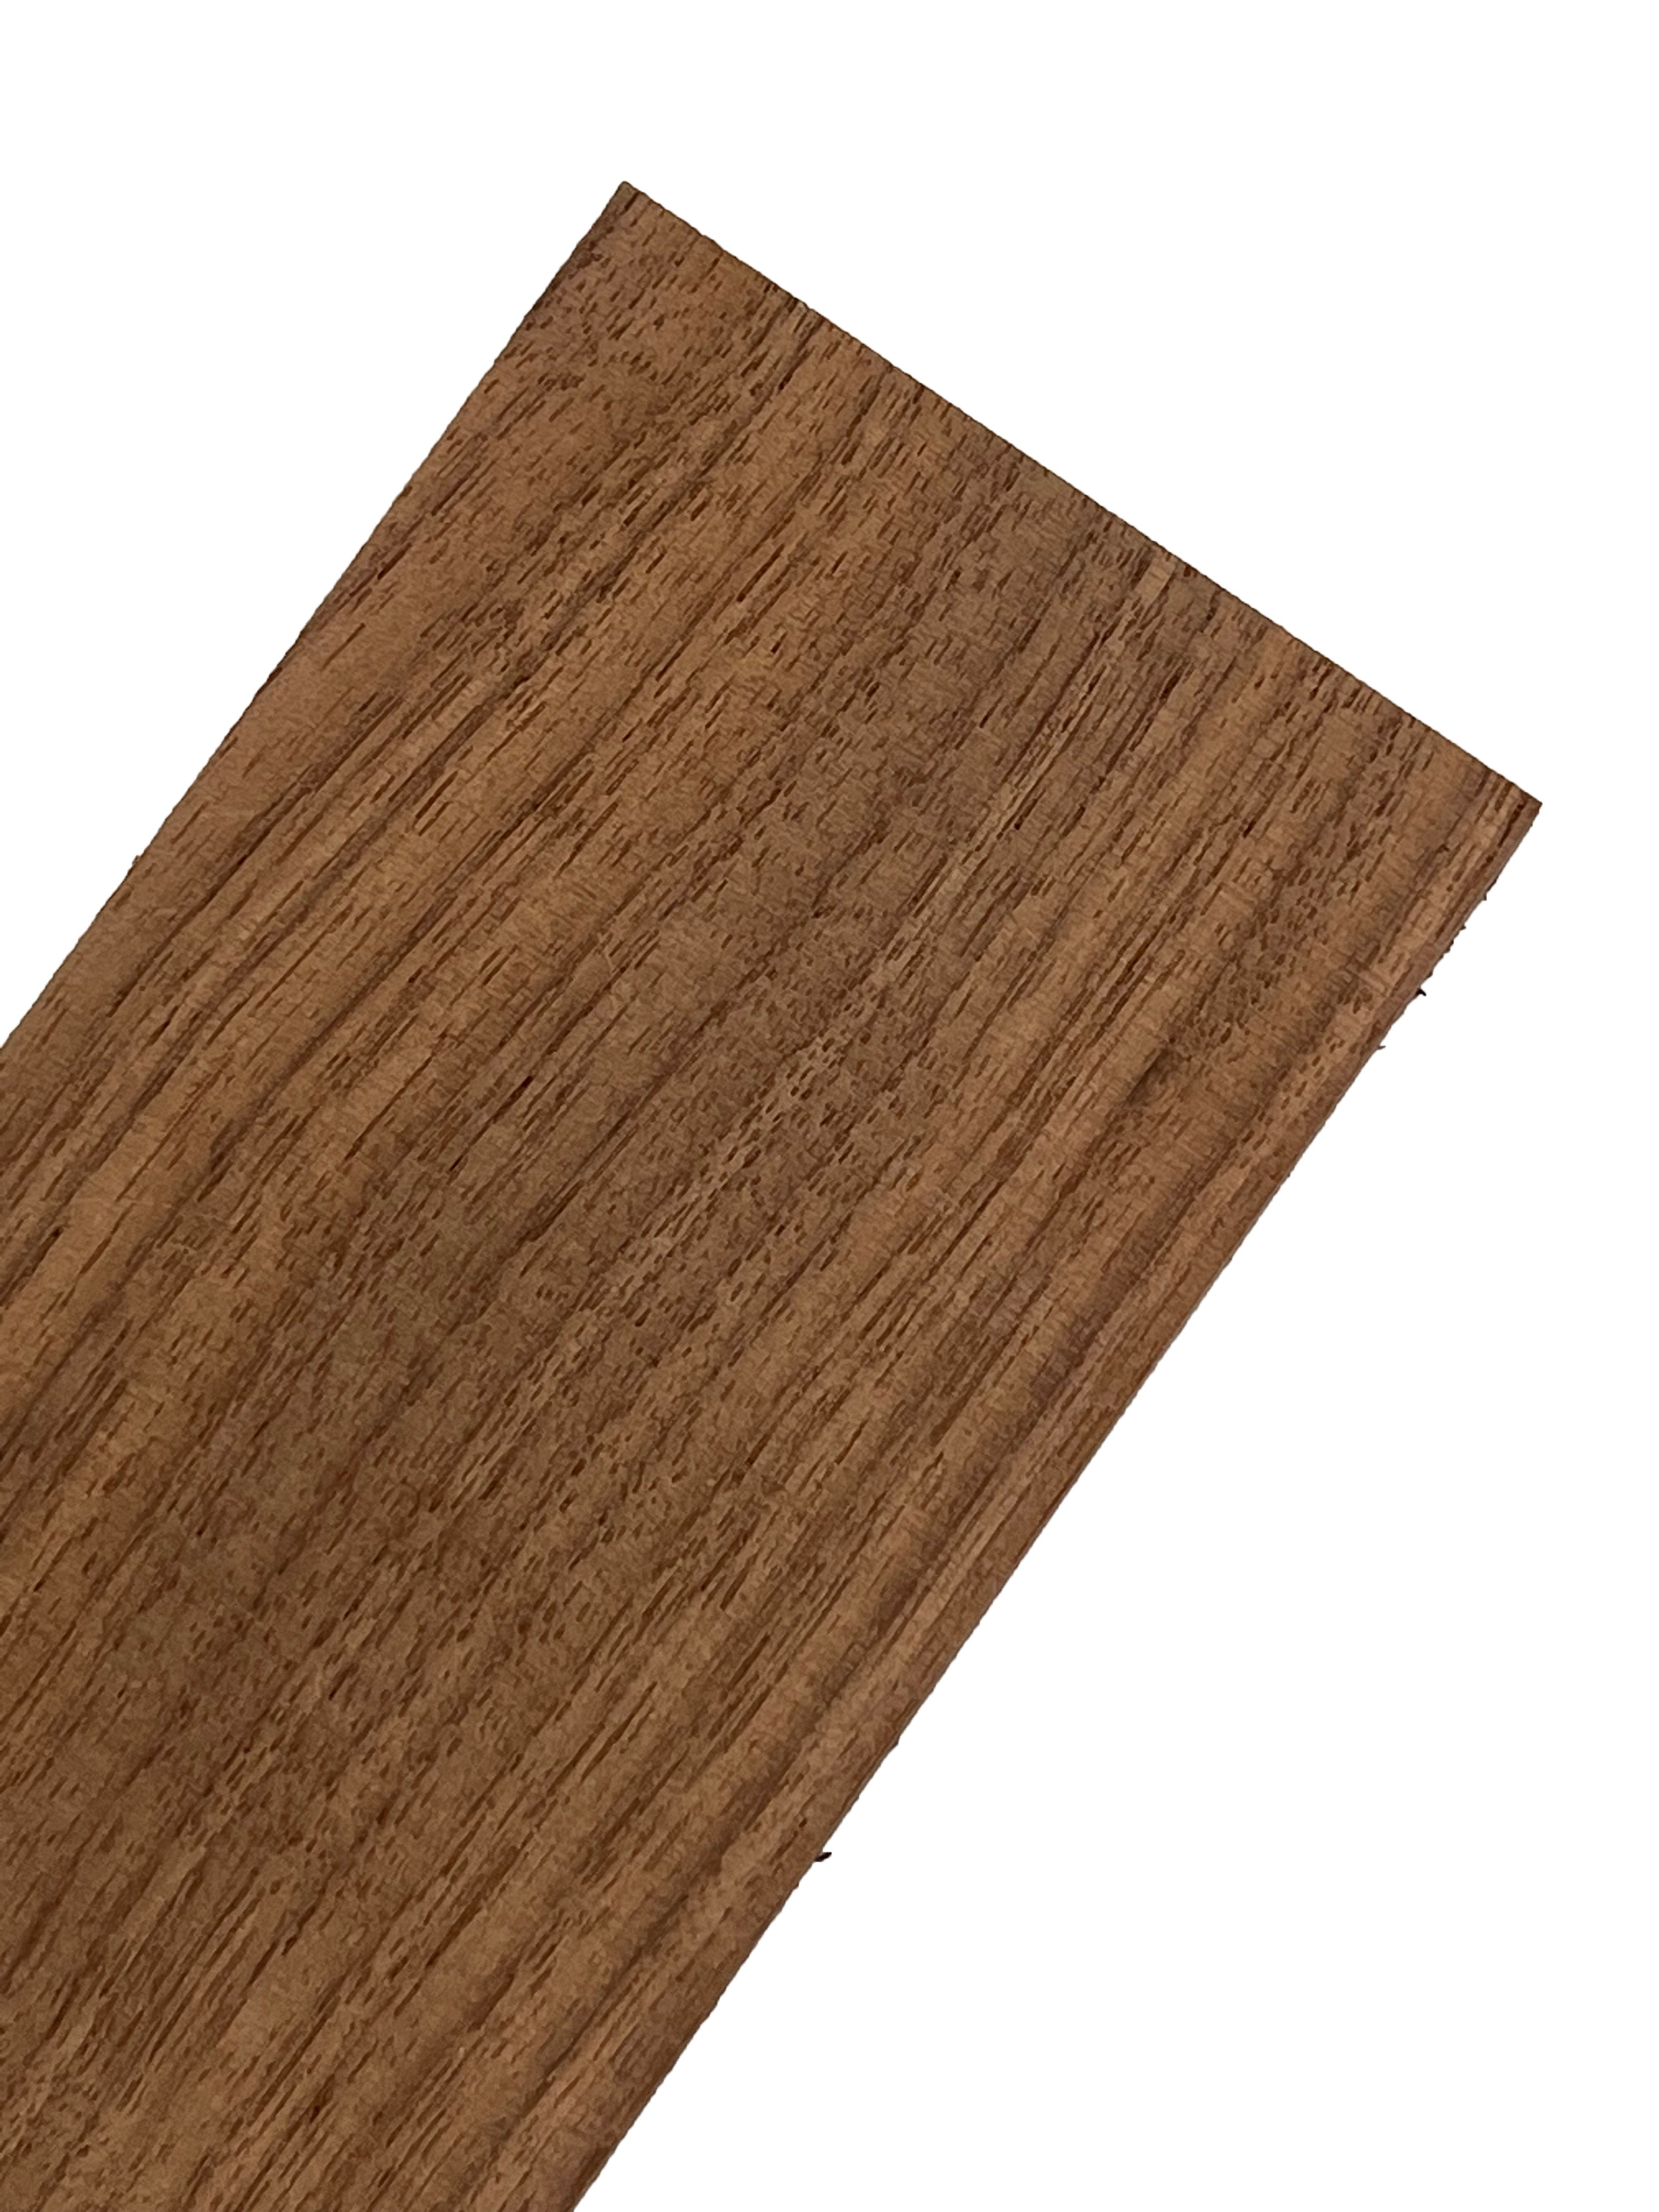 Pack of 3, Black Walnut Guitar Fingerboard Blanks 21&quot; x 2-1/2&quot; x 3/8&quot; - Exotic Wood Zone - Buy online Across USA 